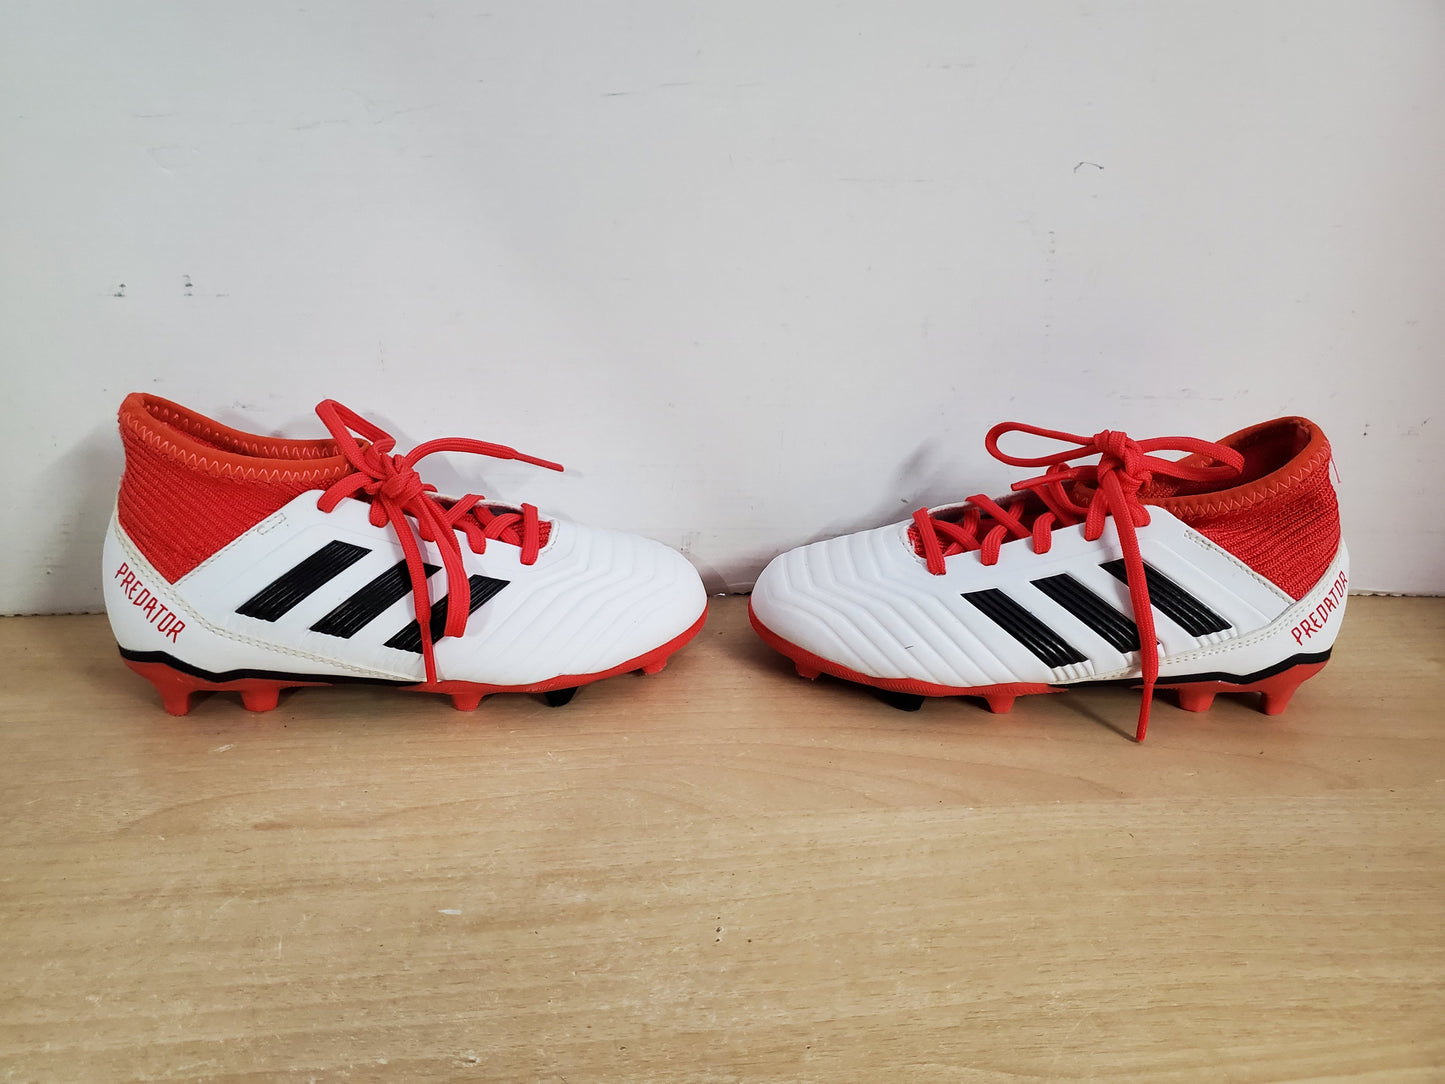 Soccer Shoes Cleats Child Size 13 Adidas Preditor With Slipper Foot White Red Excellent As New